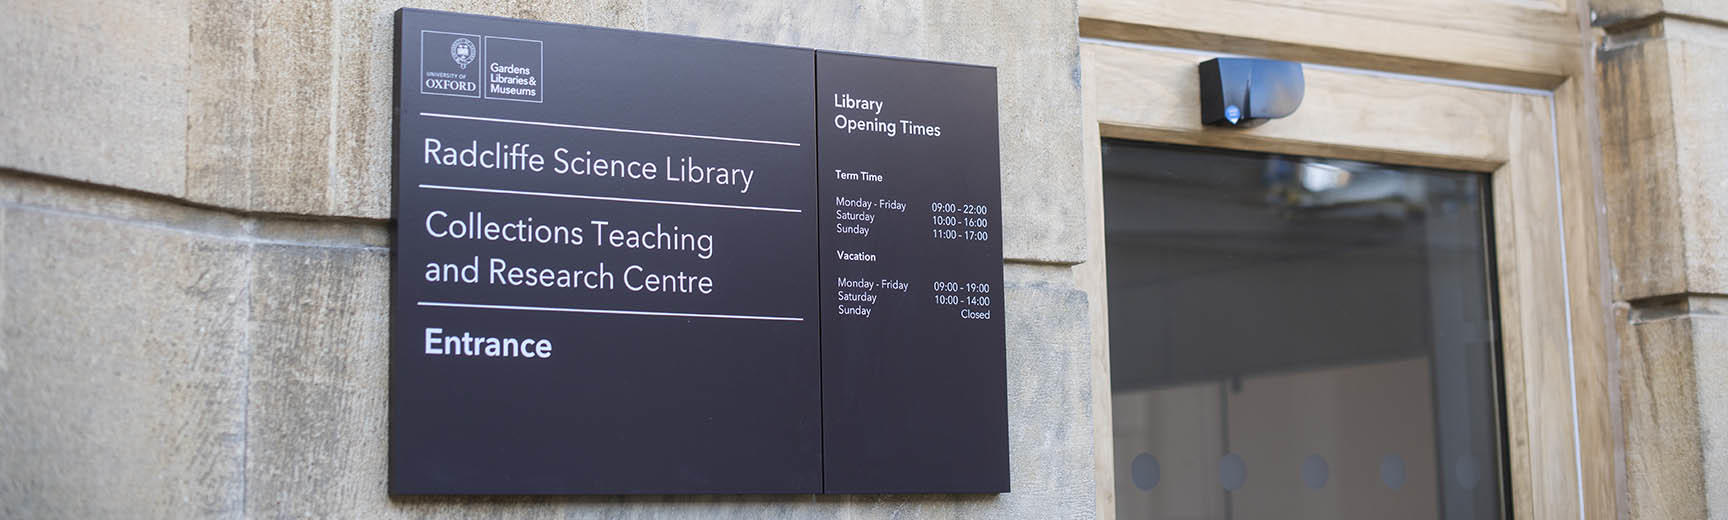 The entrance to the Radcliffe Science Library with a dark blue board displaying the name and opening hours